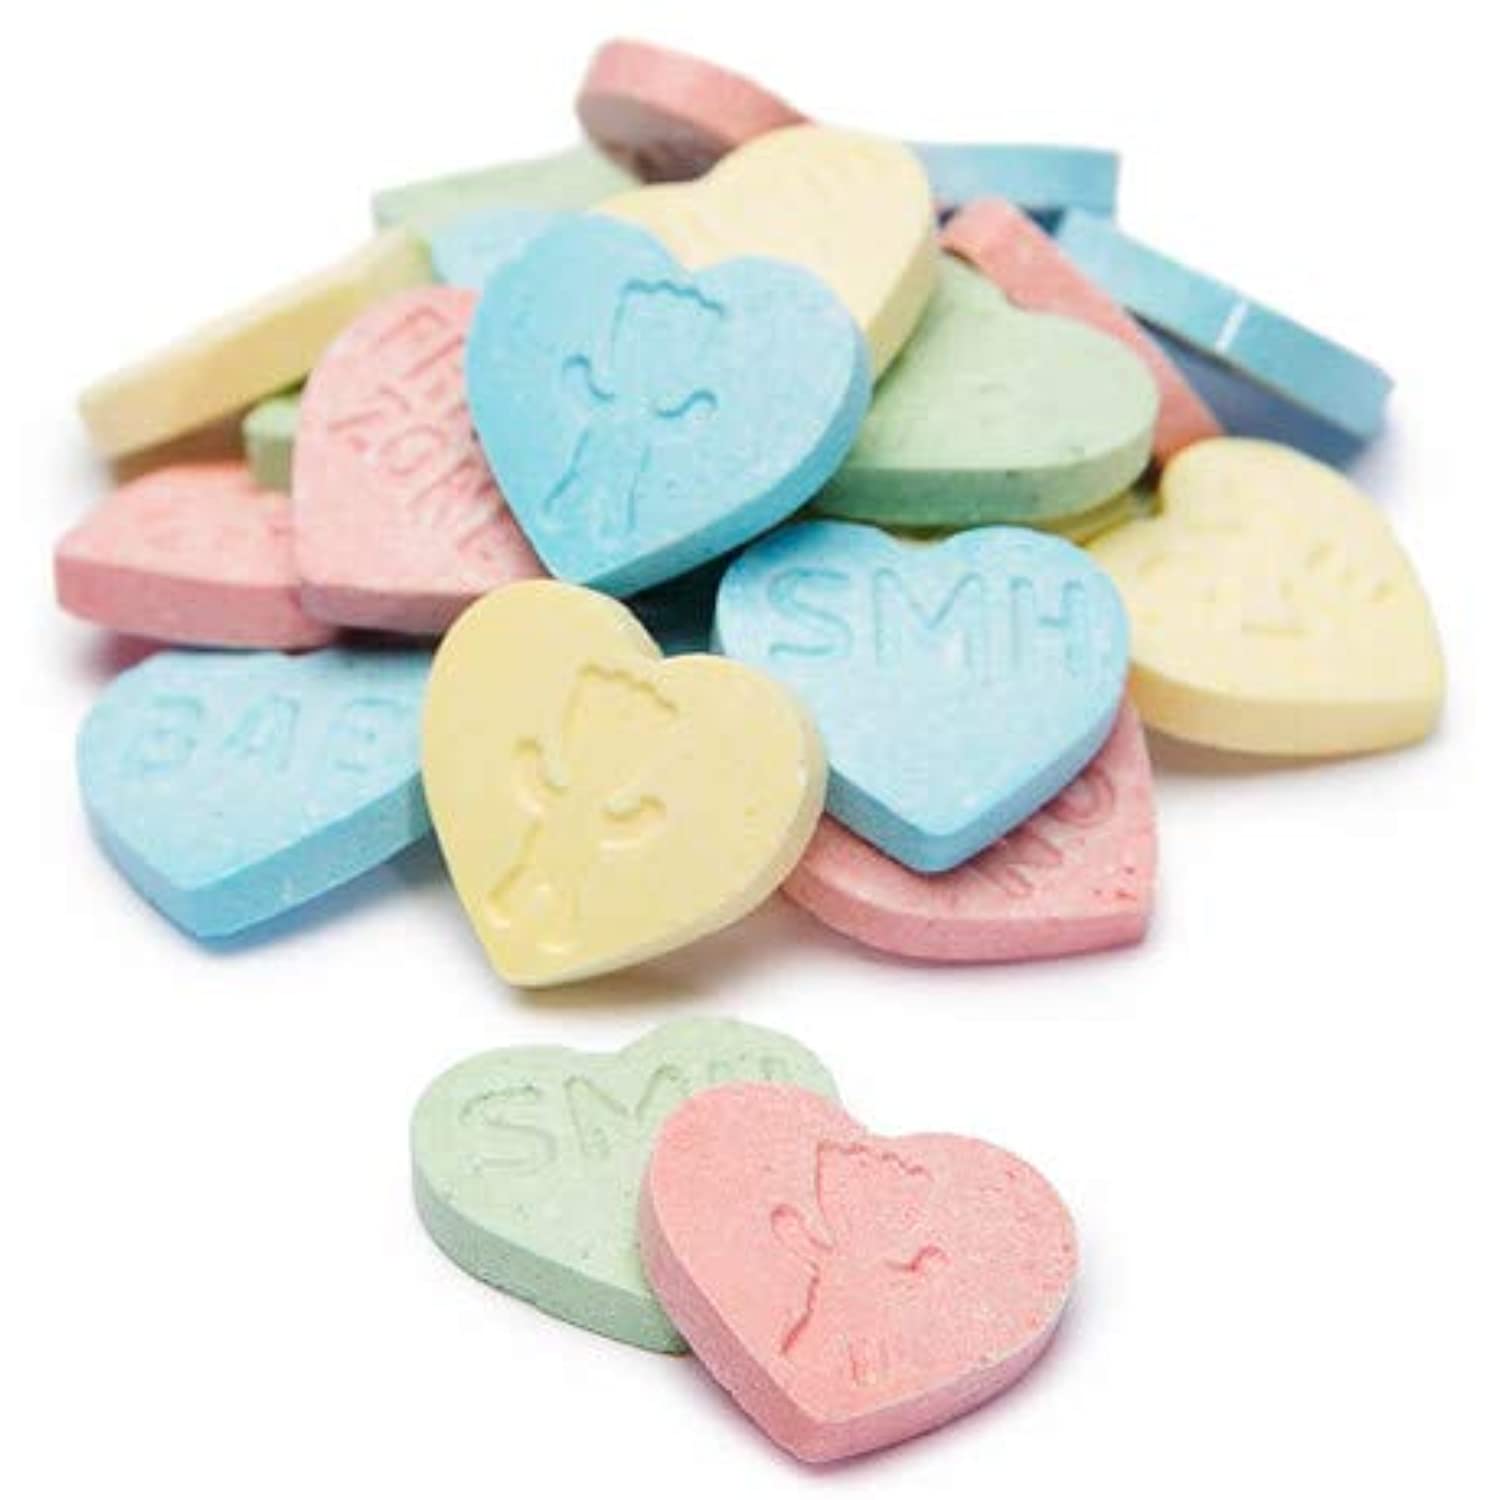 Frankford Sour Patch Candy Conversation Hearts, 13 Oz. - image 2 of 7